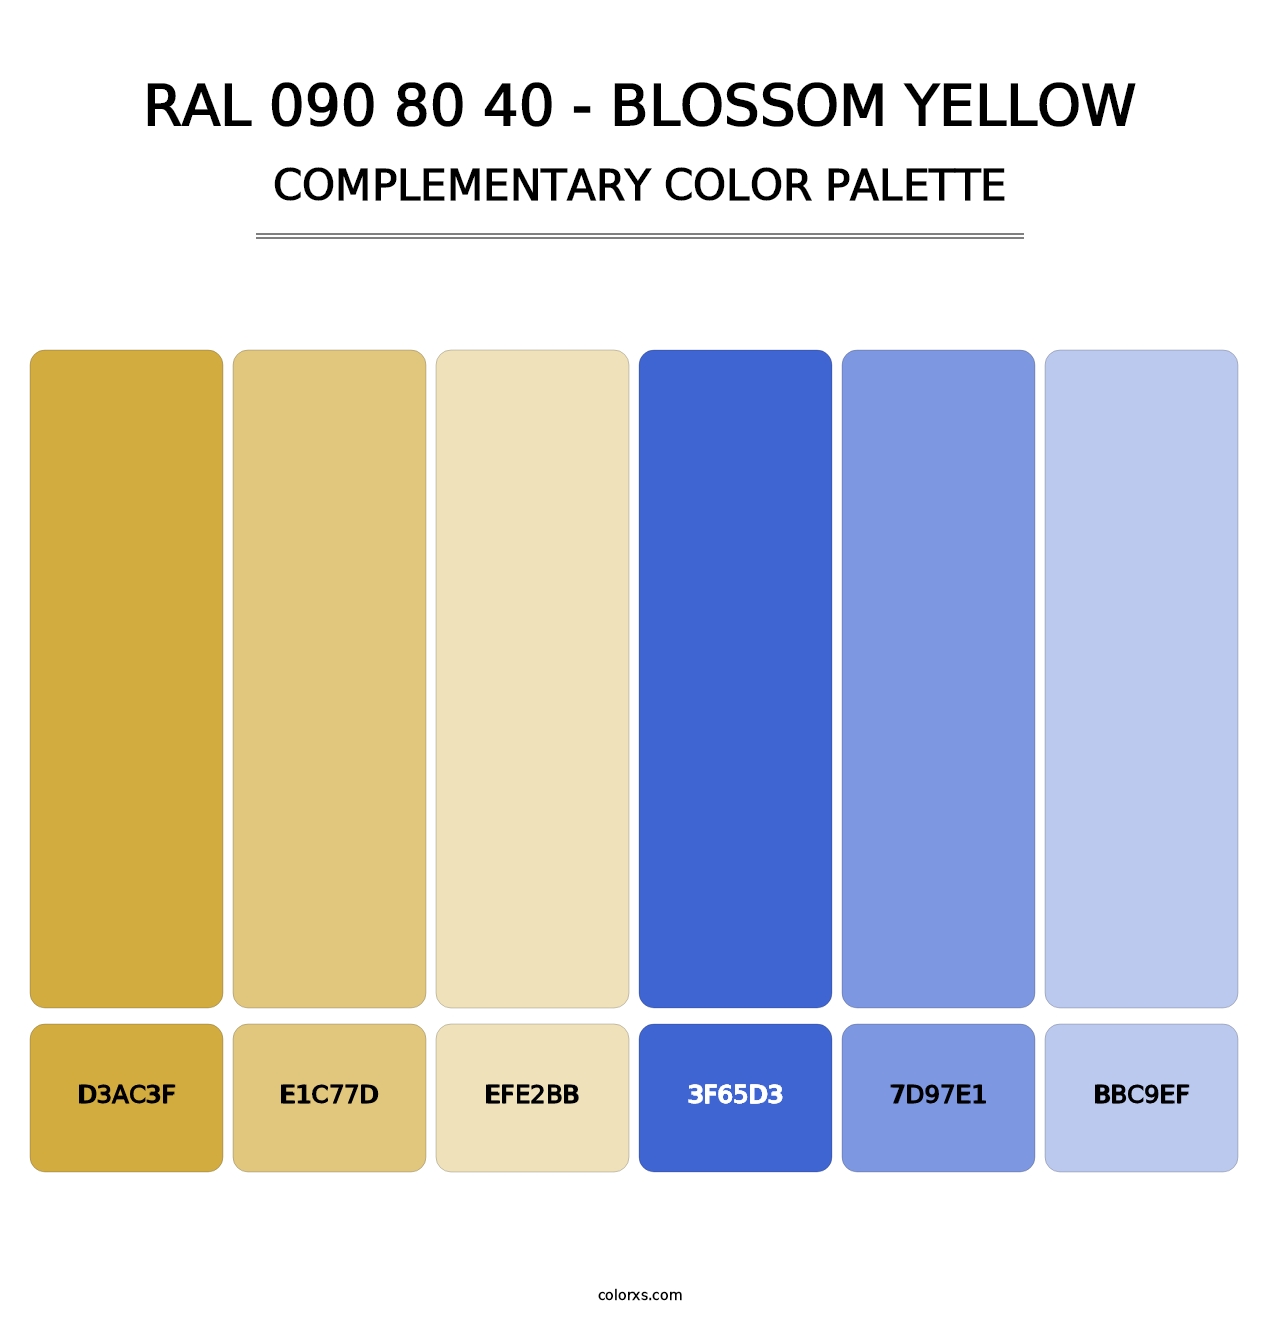 RAL 090 80 40 - Blossom Yellow - Complementary Color Palette